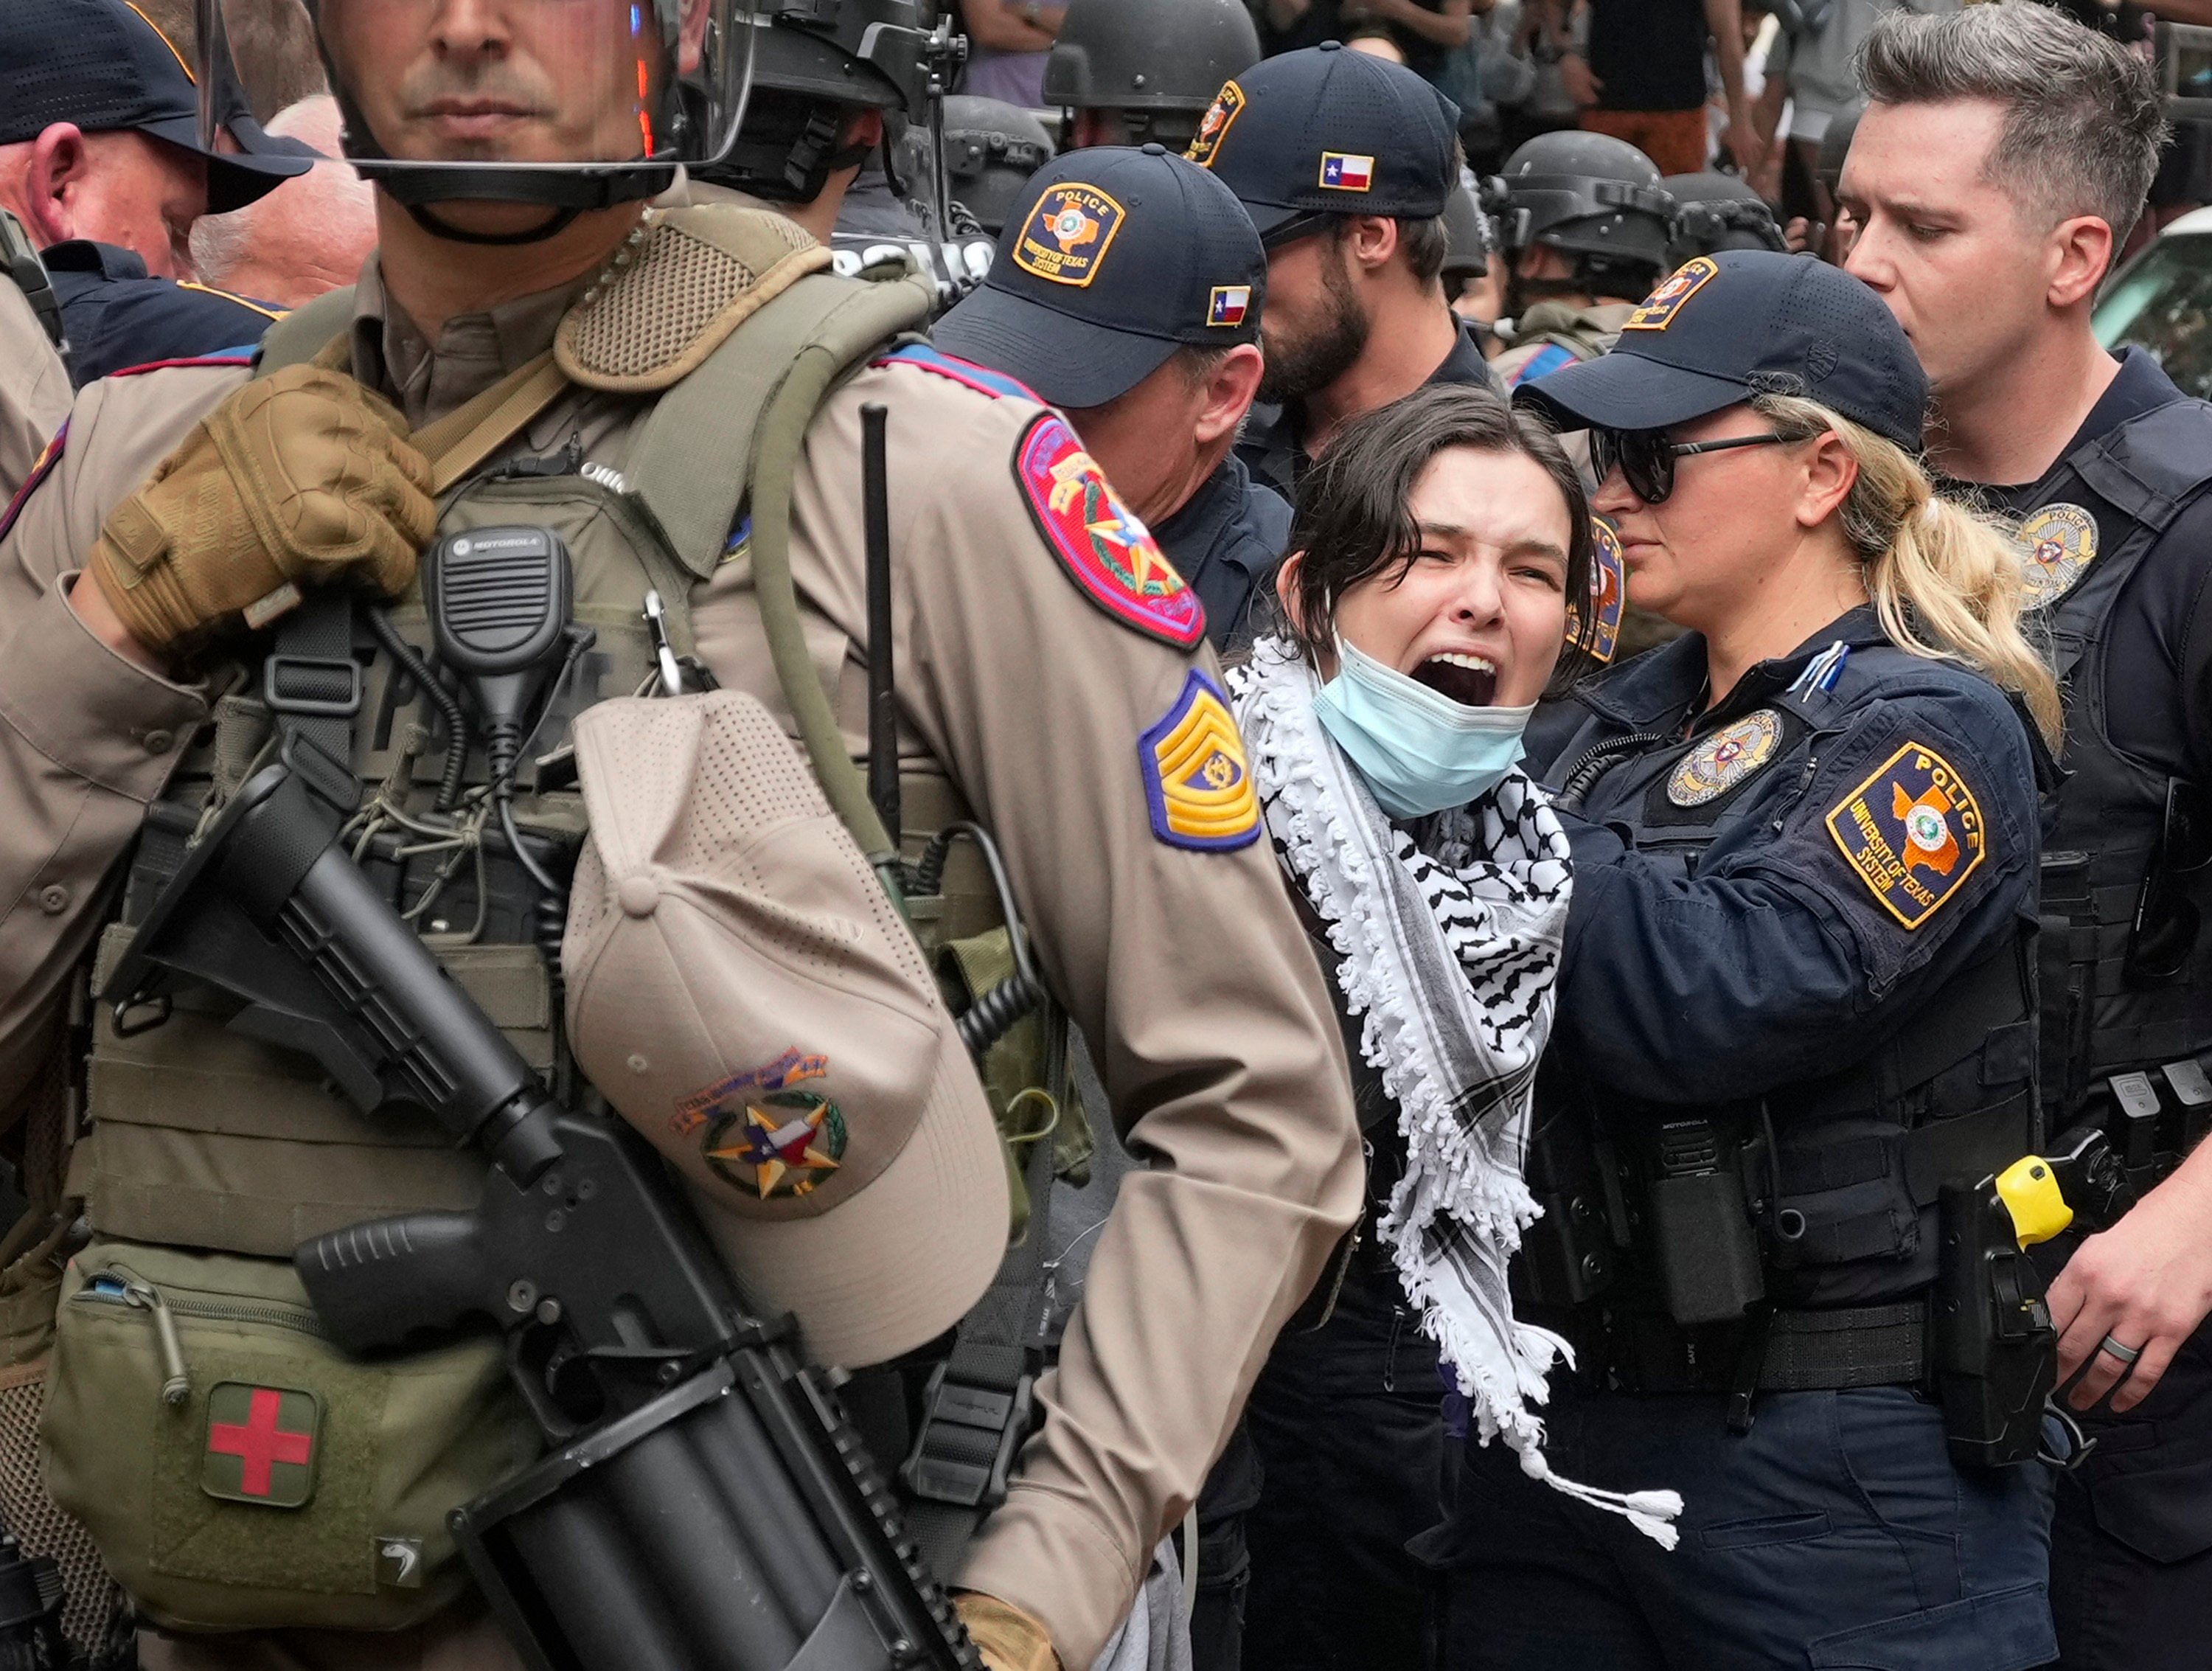 A woman being arrested at a pro-Palestinian protest at the University of Texas. Photo: Austin American-Statesman via AP